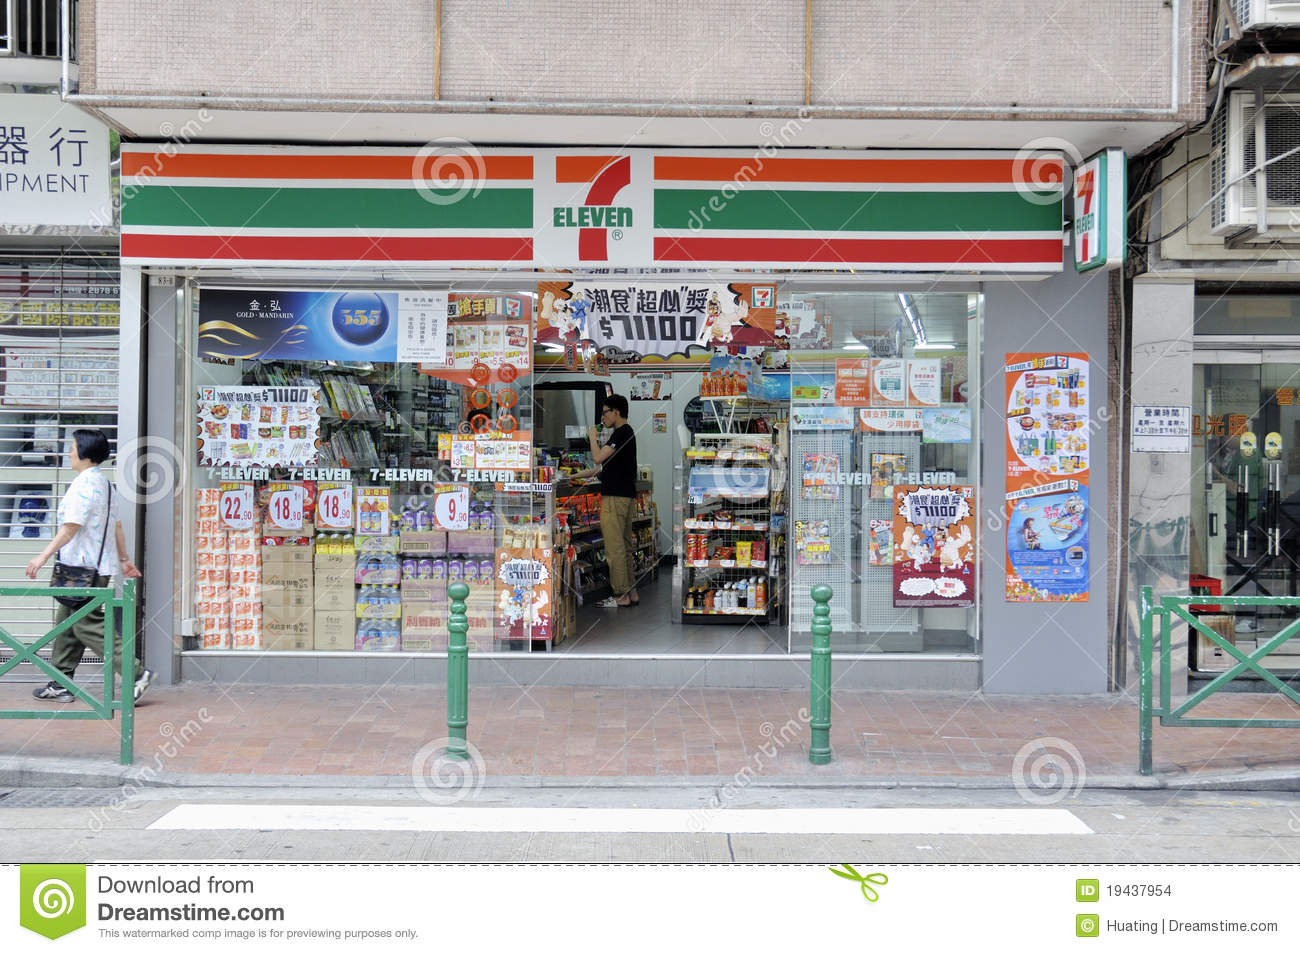 Eleven Convenience Store In Macao City China  Photo Taken On 8th    